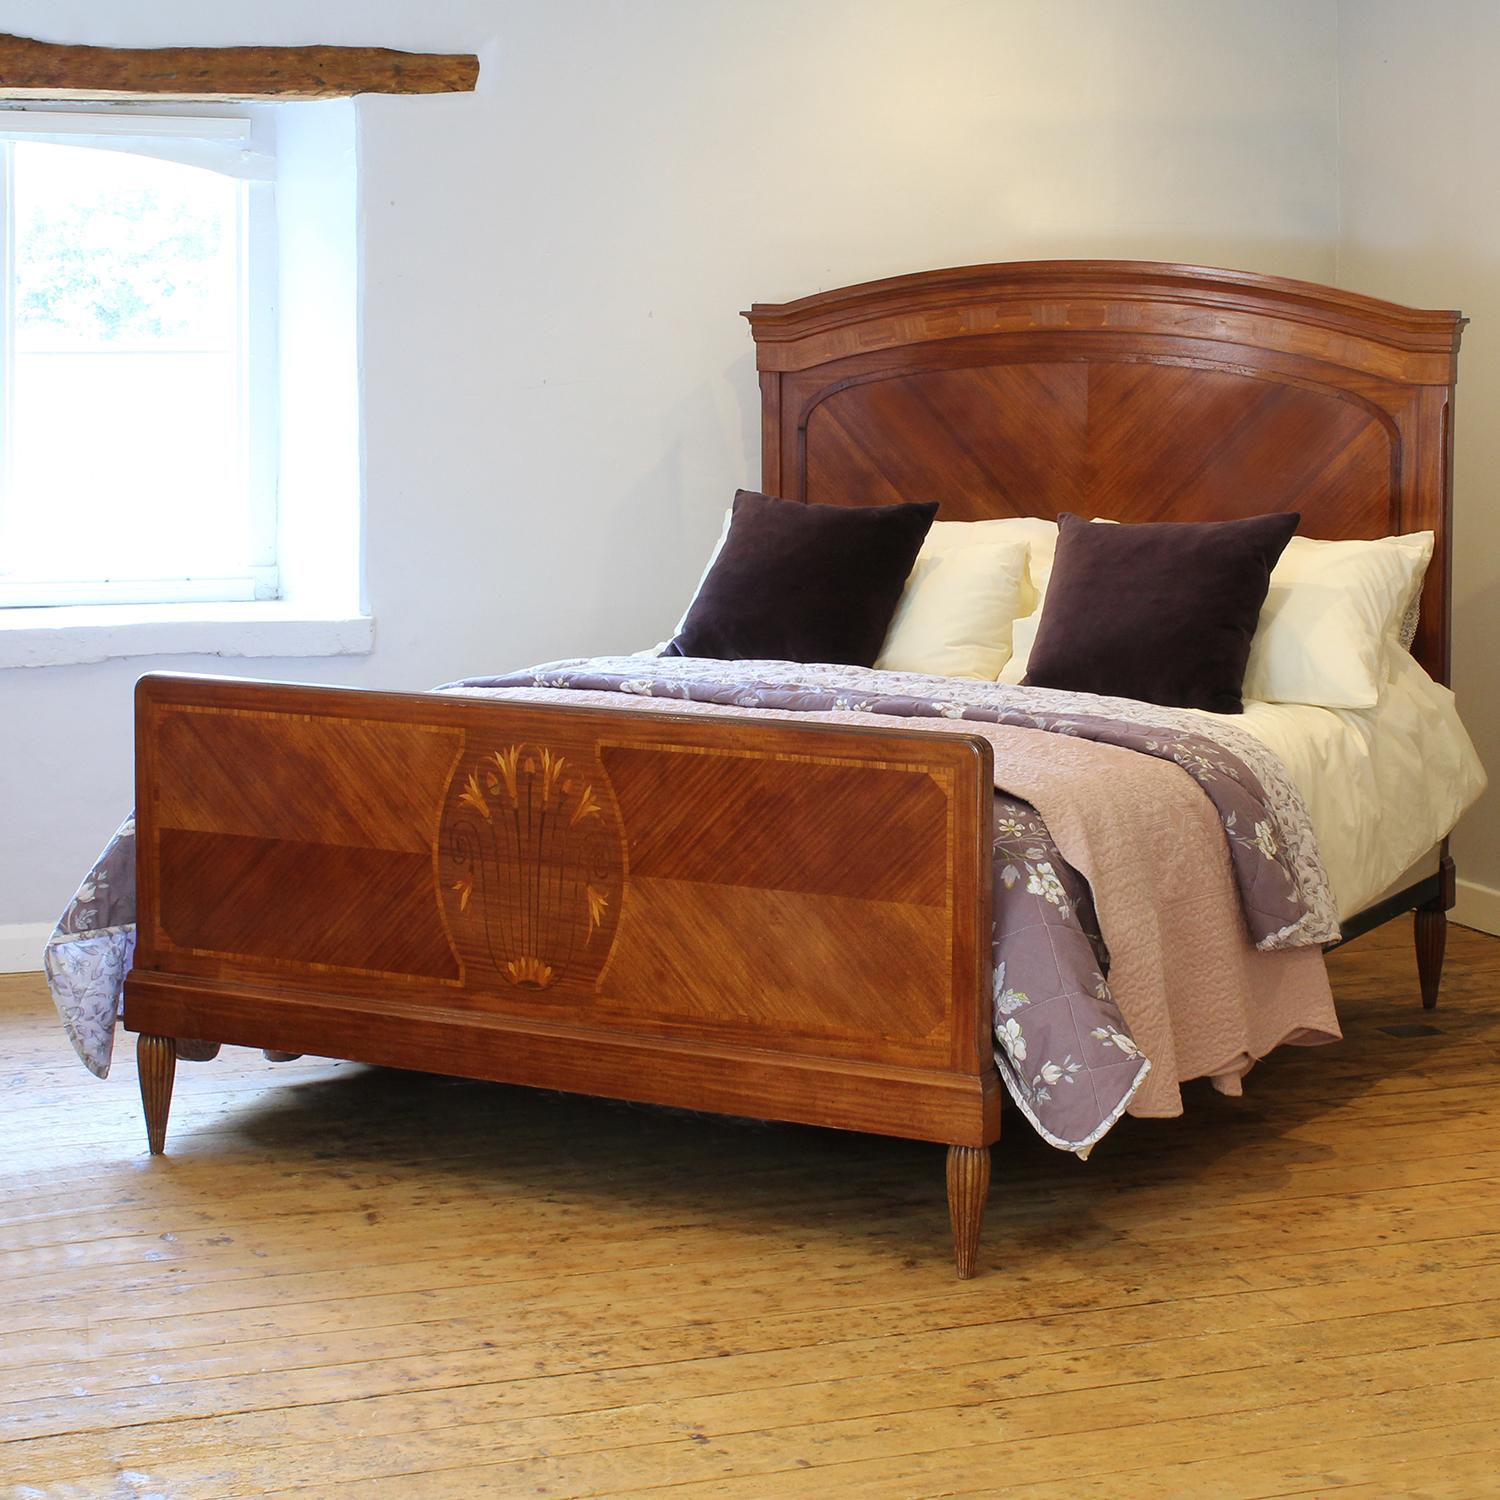 A fine antique bed with inlaid panels.

This bed accepts a British king size or American queen size, 5ft wide (60 inches or 150cm) base and mattress set.

The price includes a deep firm bed base to support the mattress.

The mattress bedding